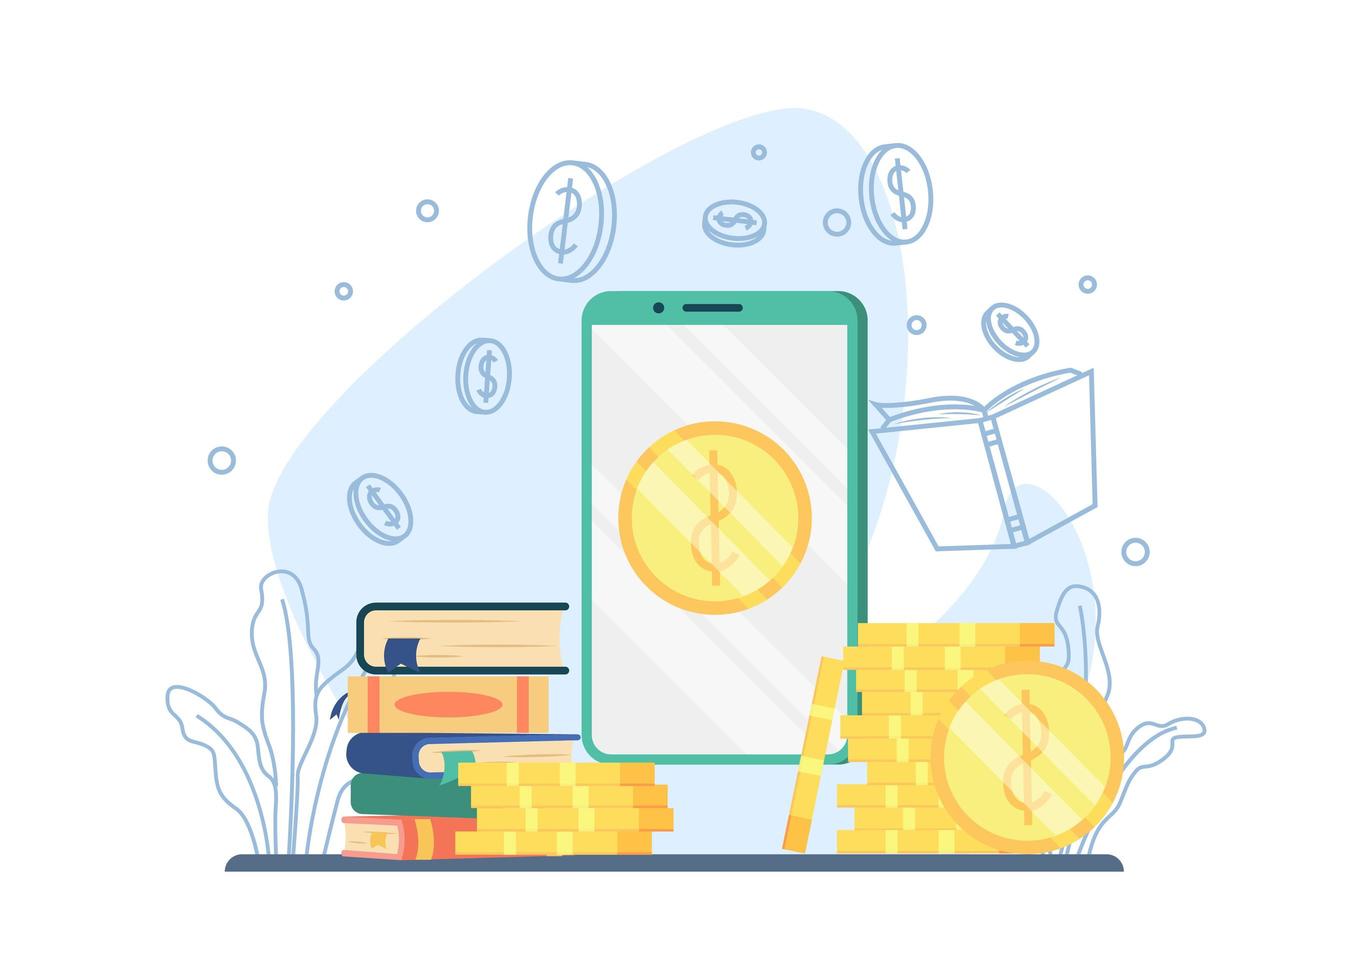 Online Payment for bookstore concept vector